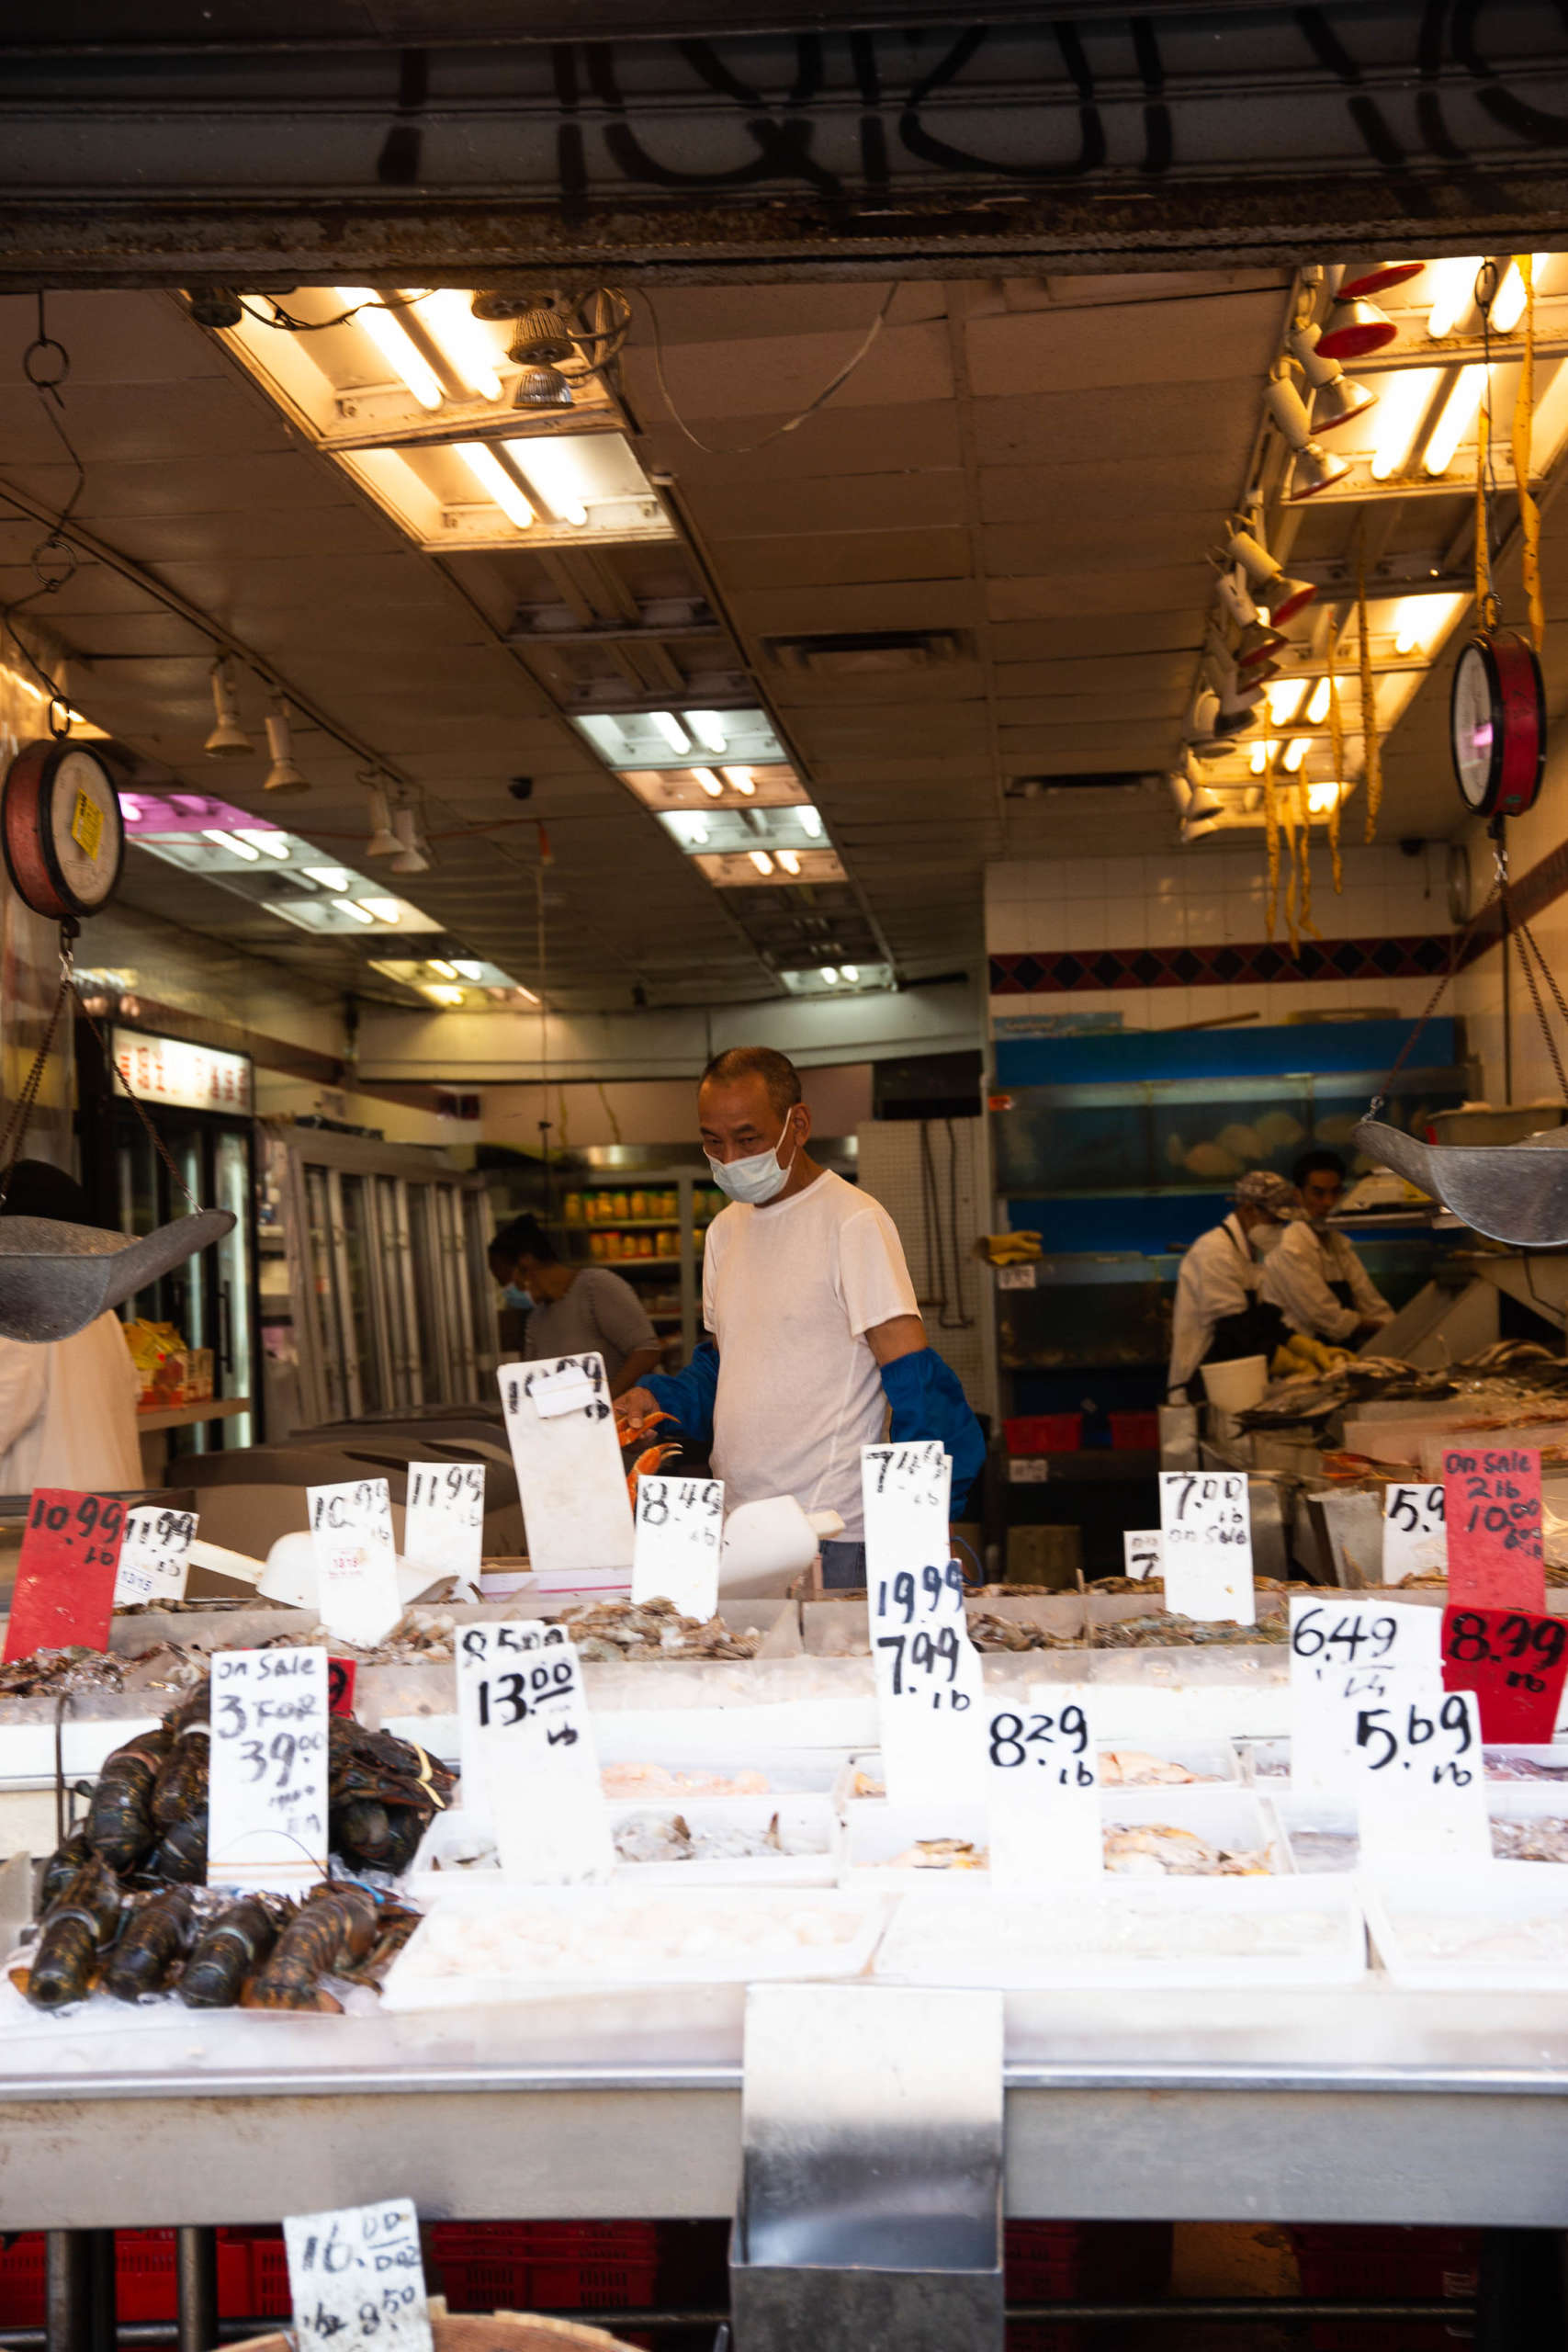 People browse the displays at a seafood store under fluorescent lighting. White price tags are arranged over each display.